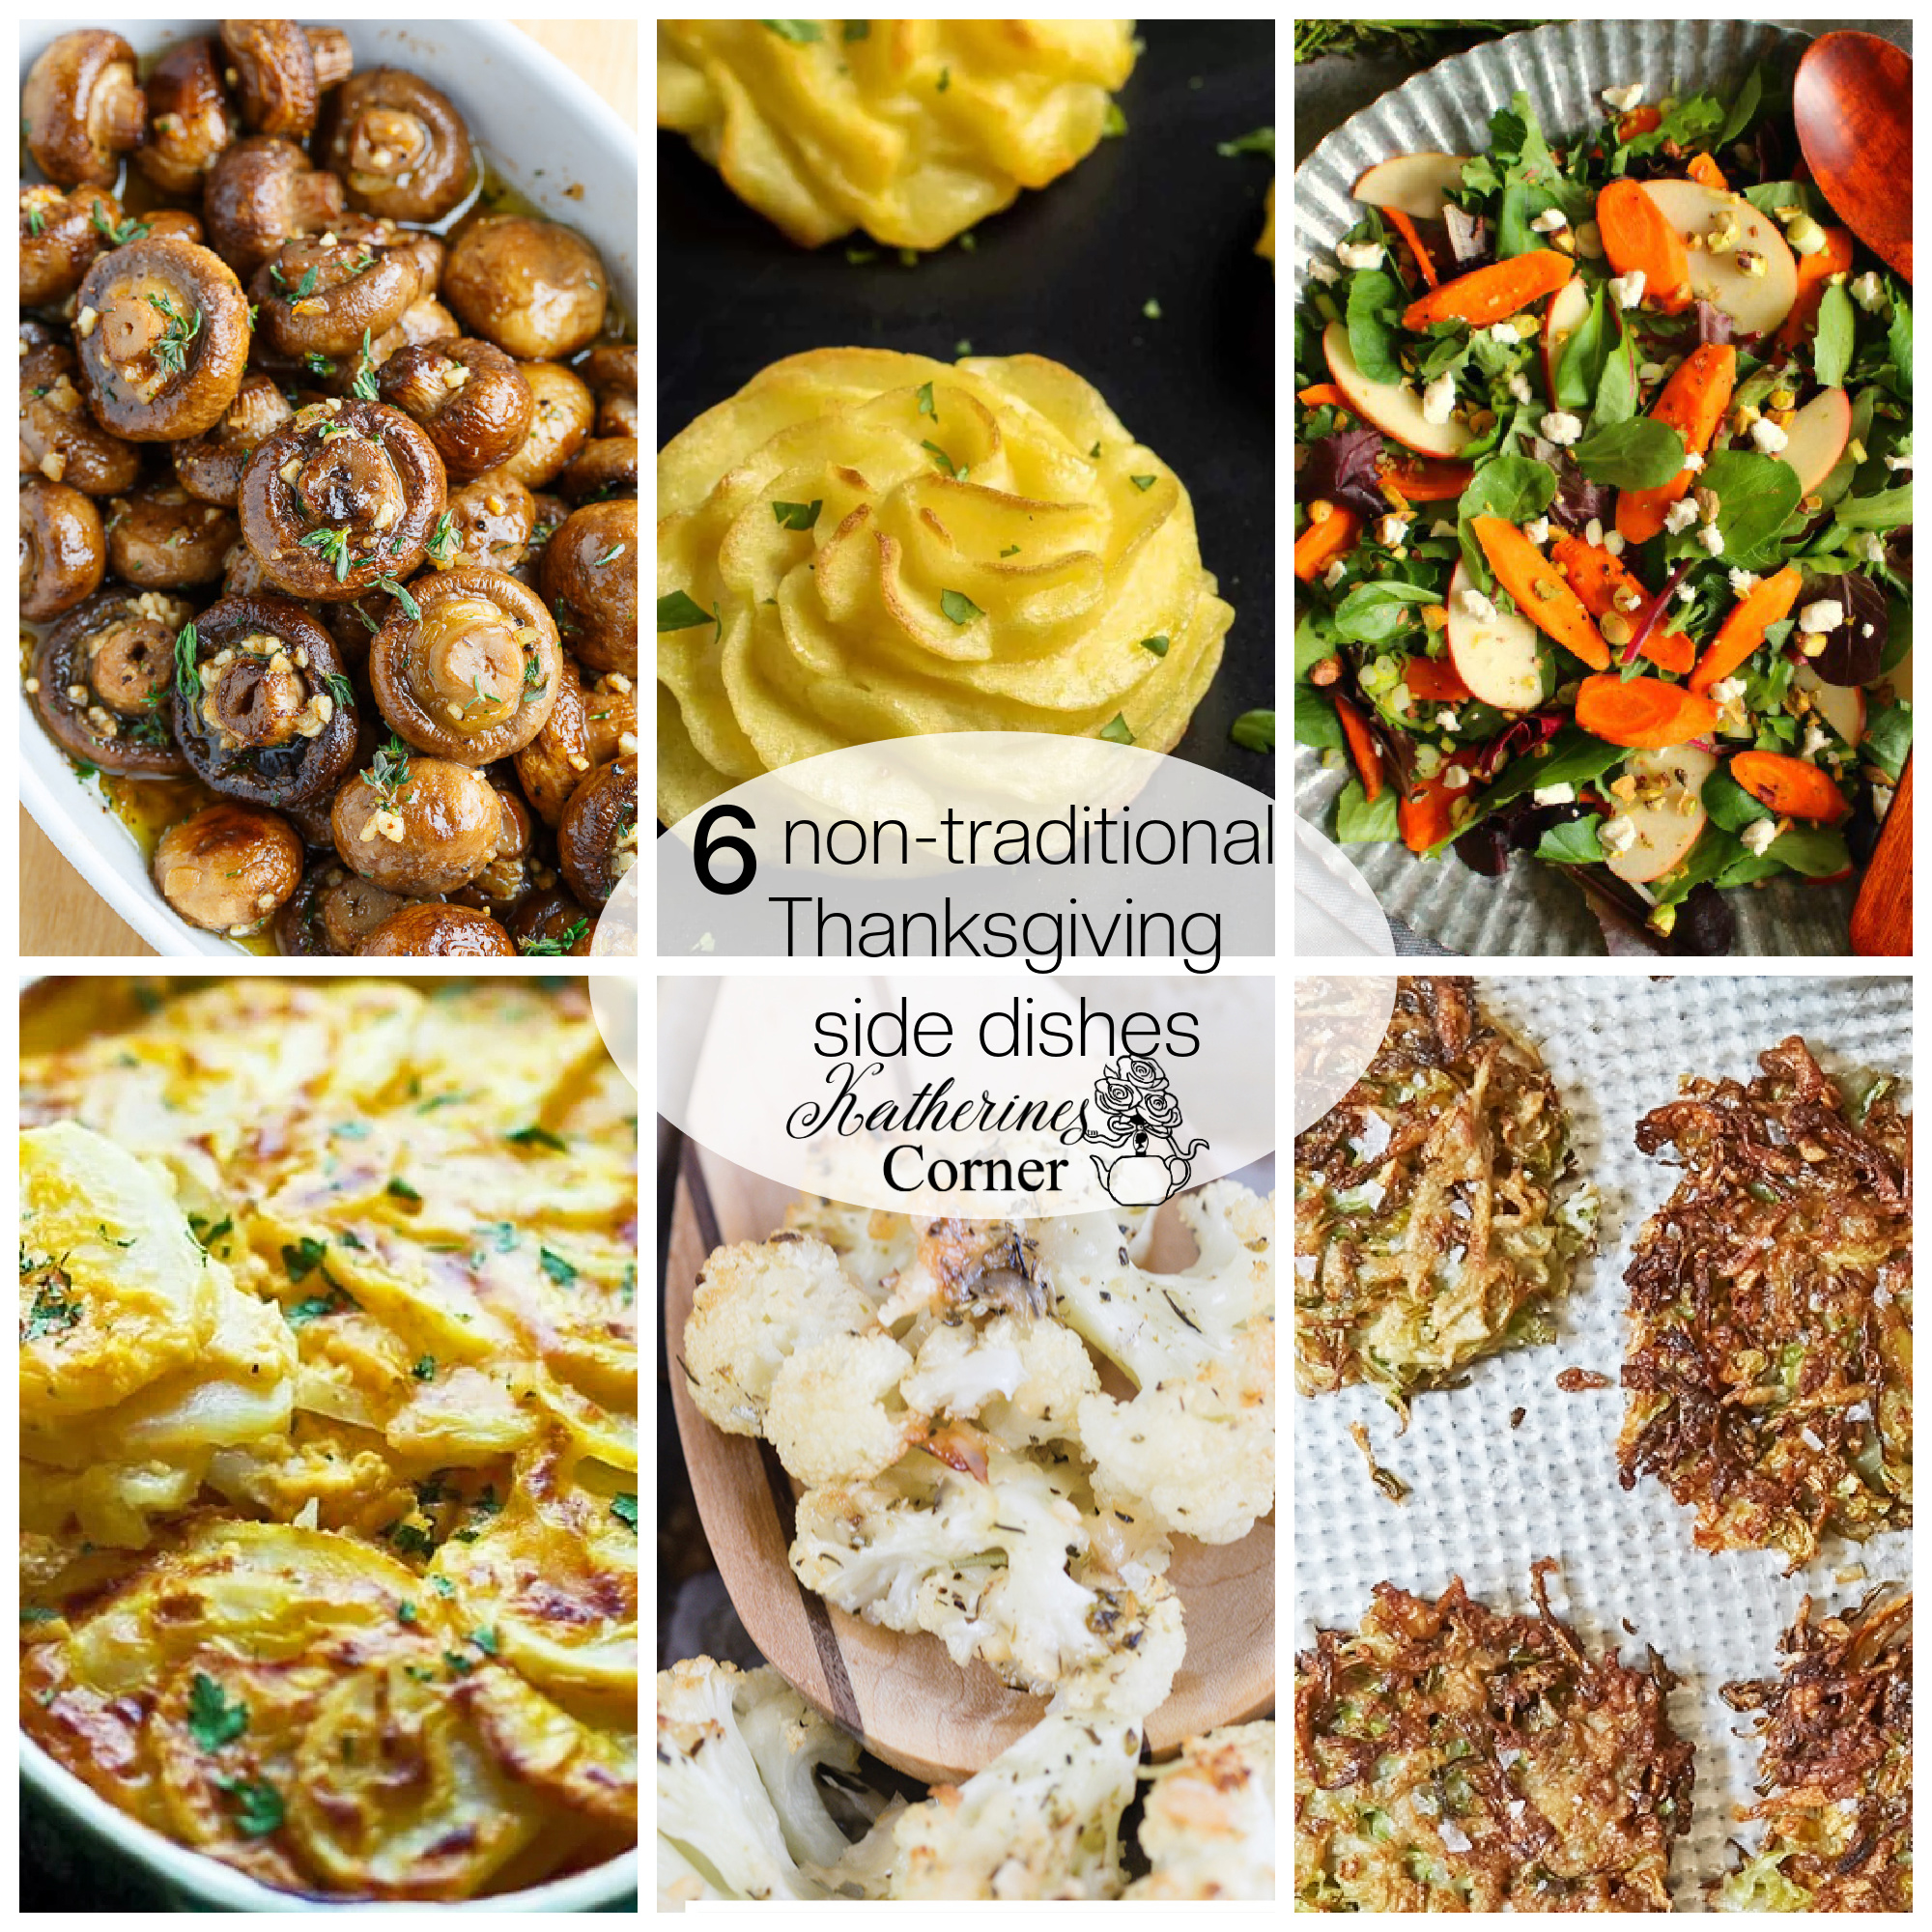 6 Non-Traditional Thanksgiving Side Dishes